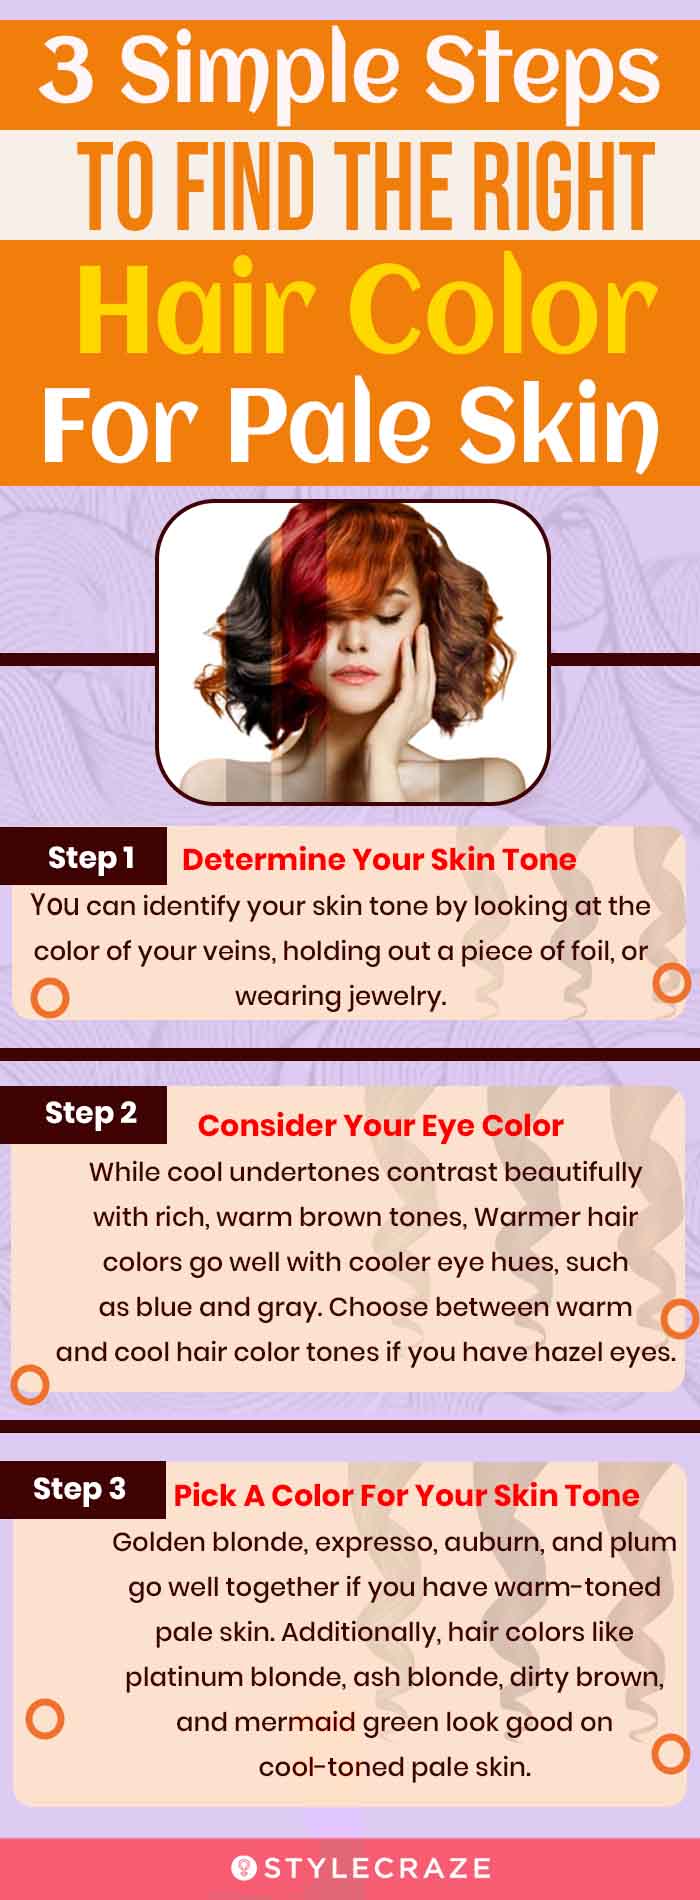 3 simple steps to find the right hair color for pale skin (infographic)